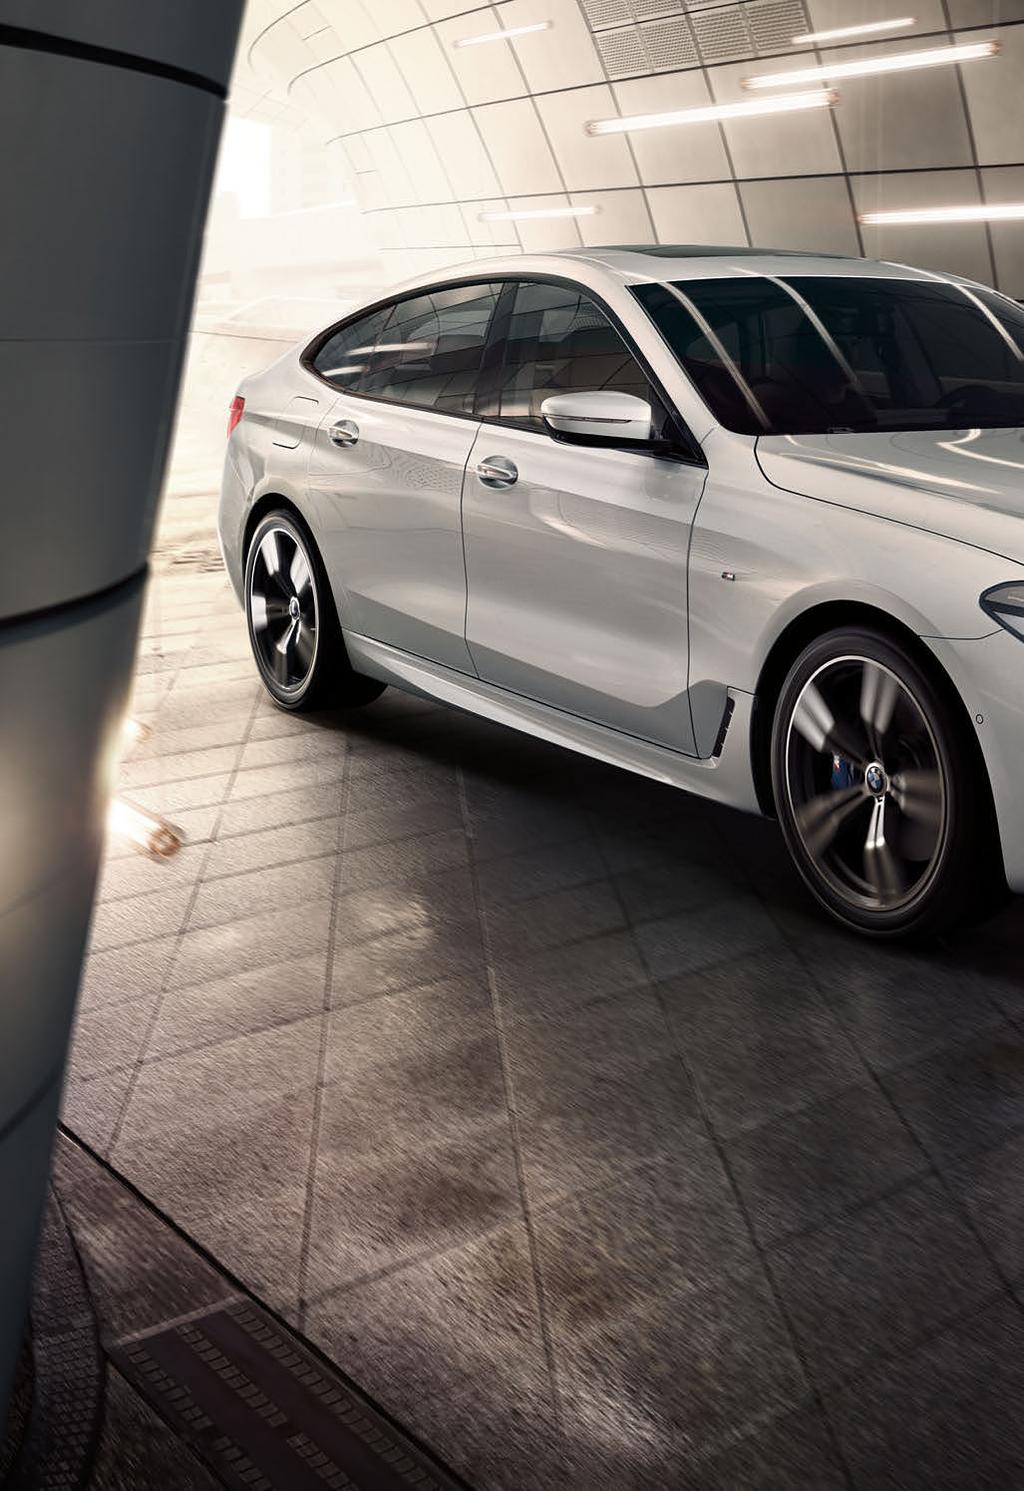 THE FIRST BMW 6 SERIES GRAN TURISMO HAS EARNT ITS NAME IT COMBINES AN EXCEPTIONALLY SPACIOUS INTERIOR WITH MAXIMUM COMFORT,